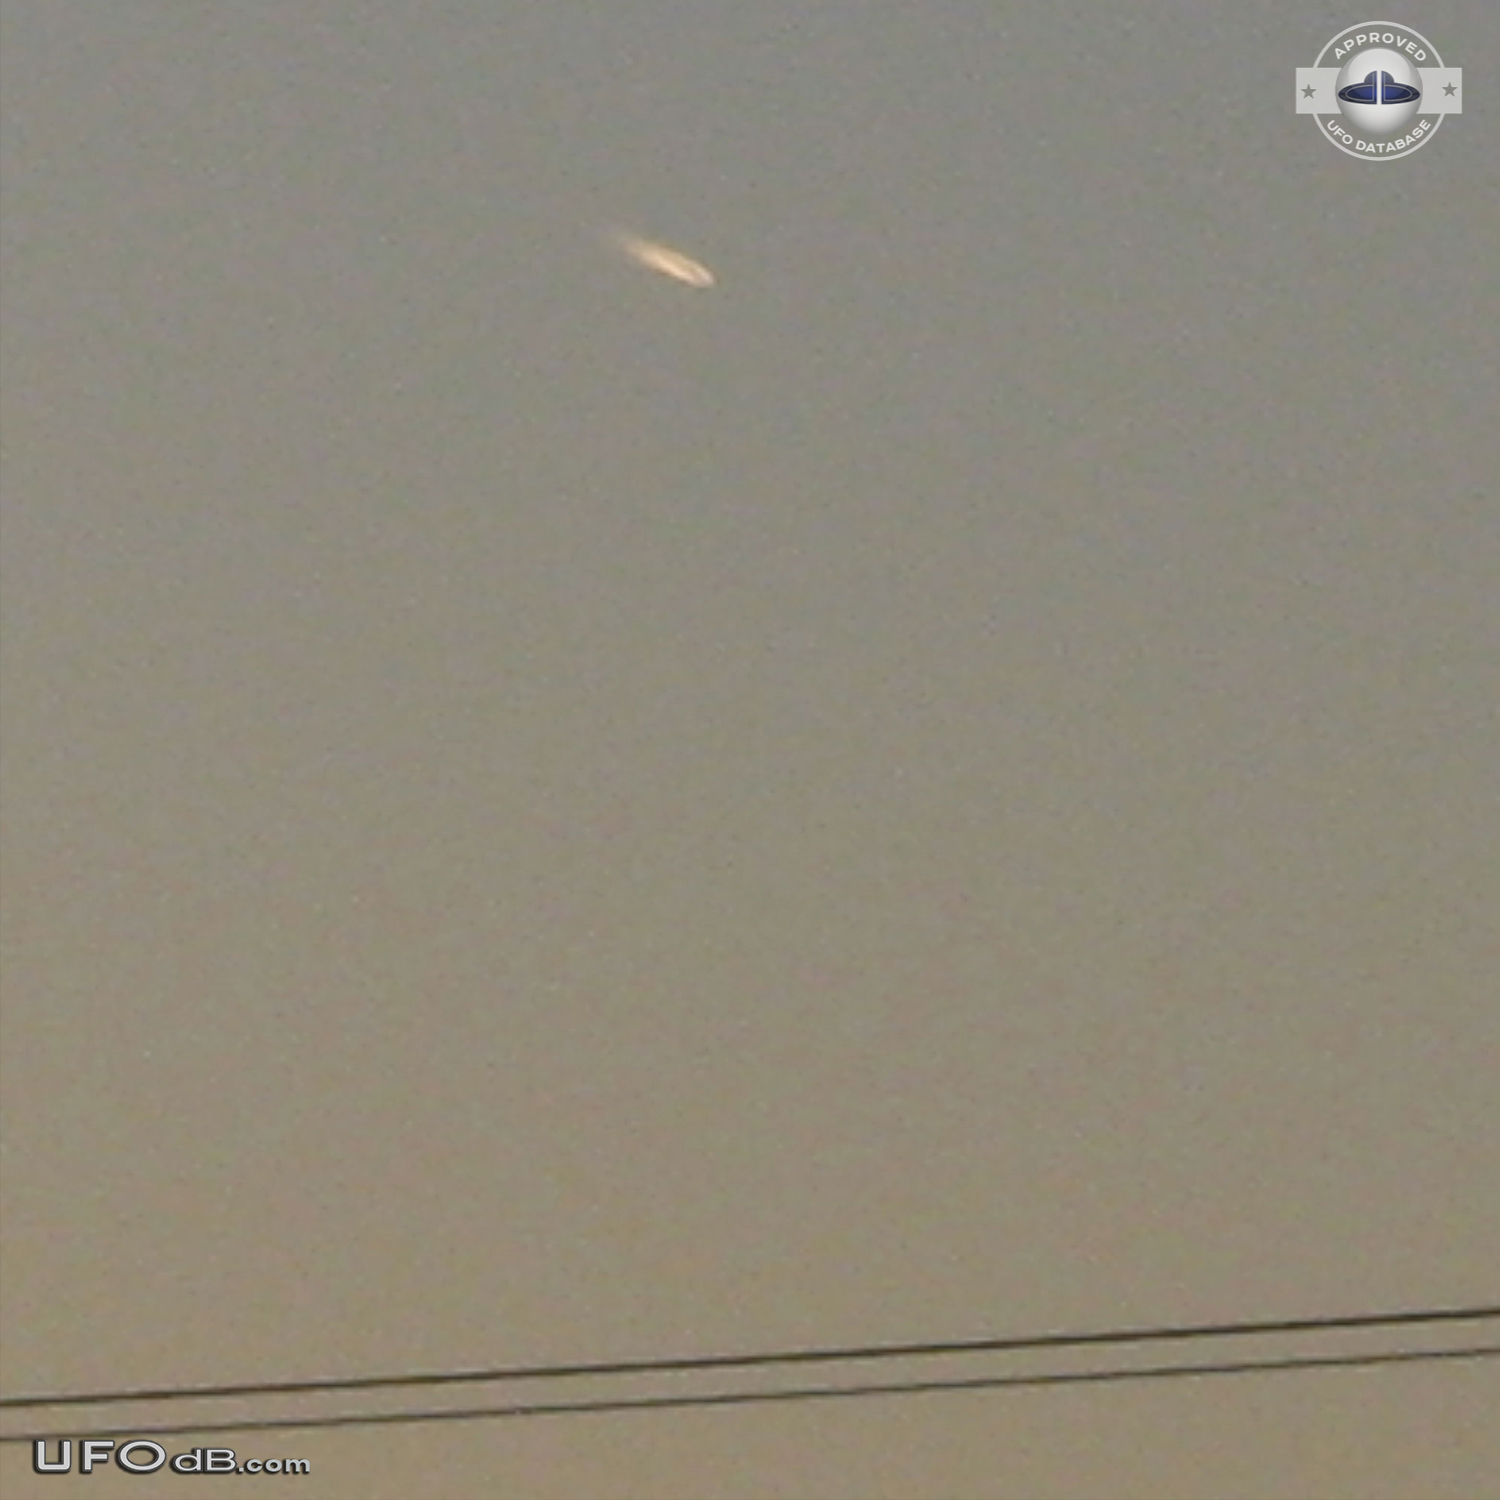 Slow Lonely cloud in clear sky is a UFO in Ostrobothnia Finland 2010 UFO Picture #529-1